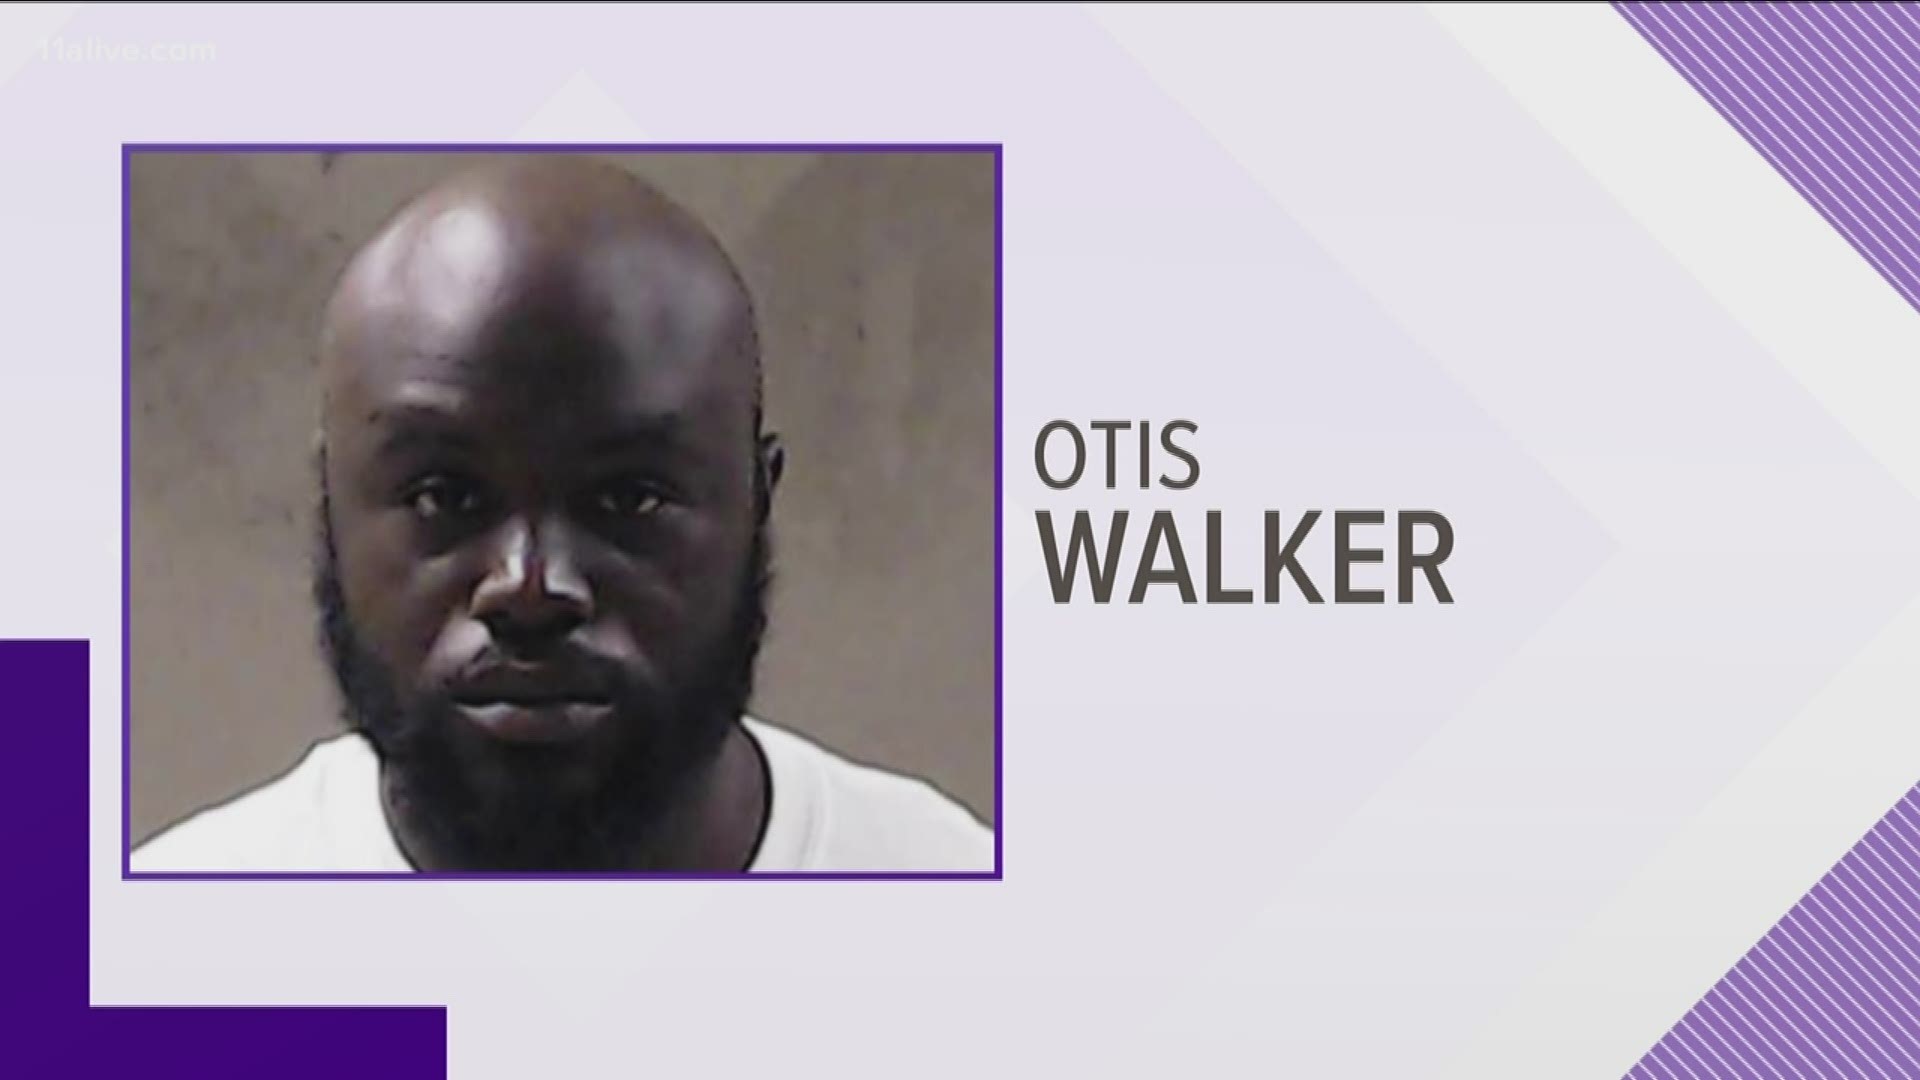 Otis Walker was on the run for a week following the August 1 shooting, before police officers were able to take him into custody on August 8 in Lithonia.